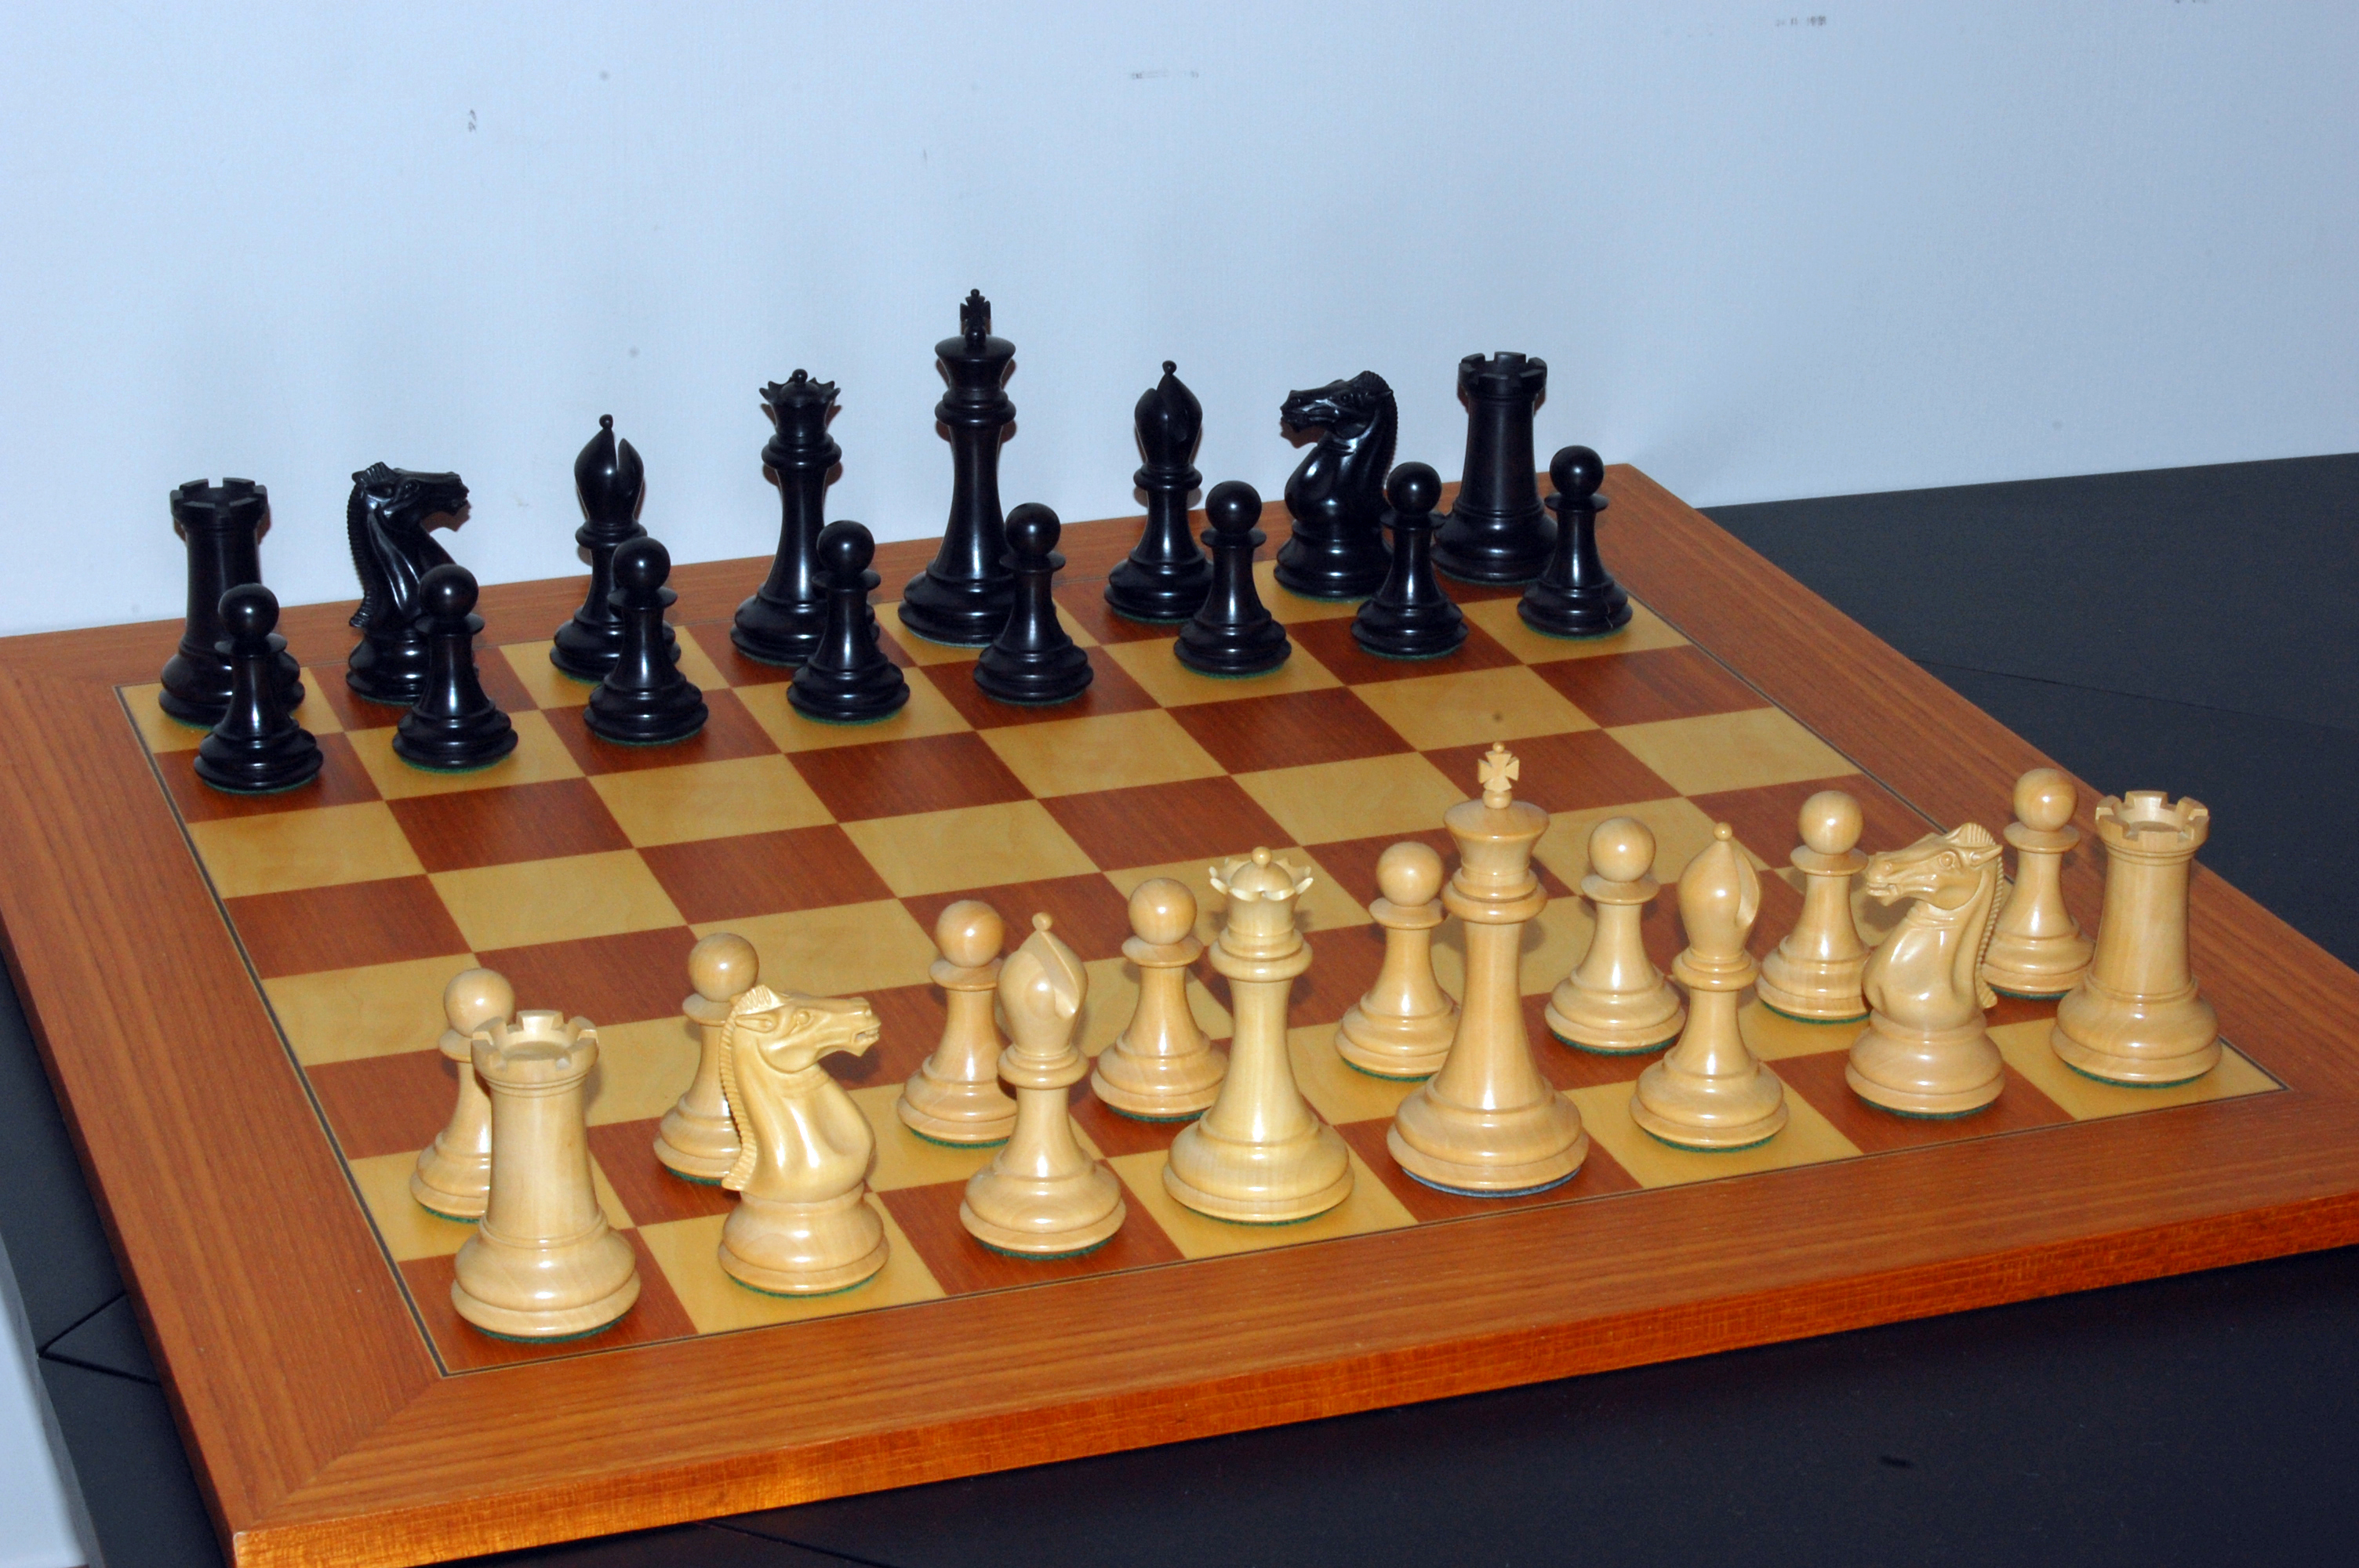 One of Chess's Best Opening! : 6 Steps - Instructables